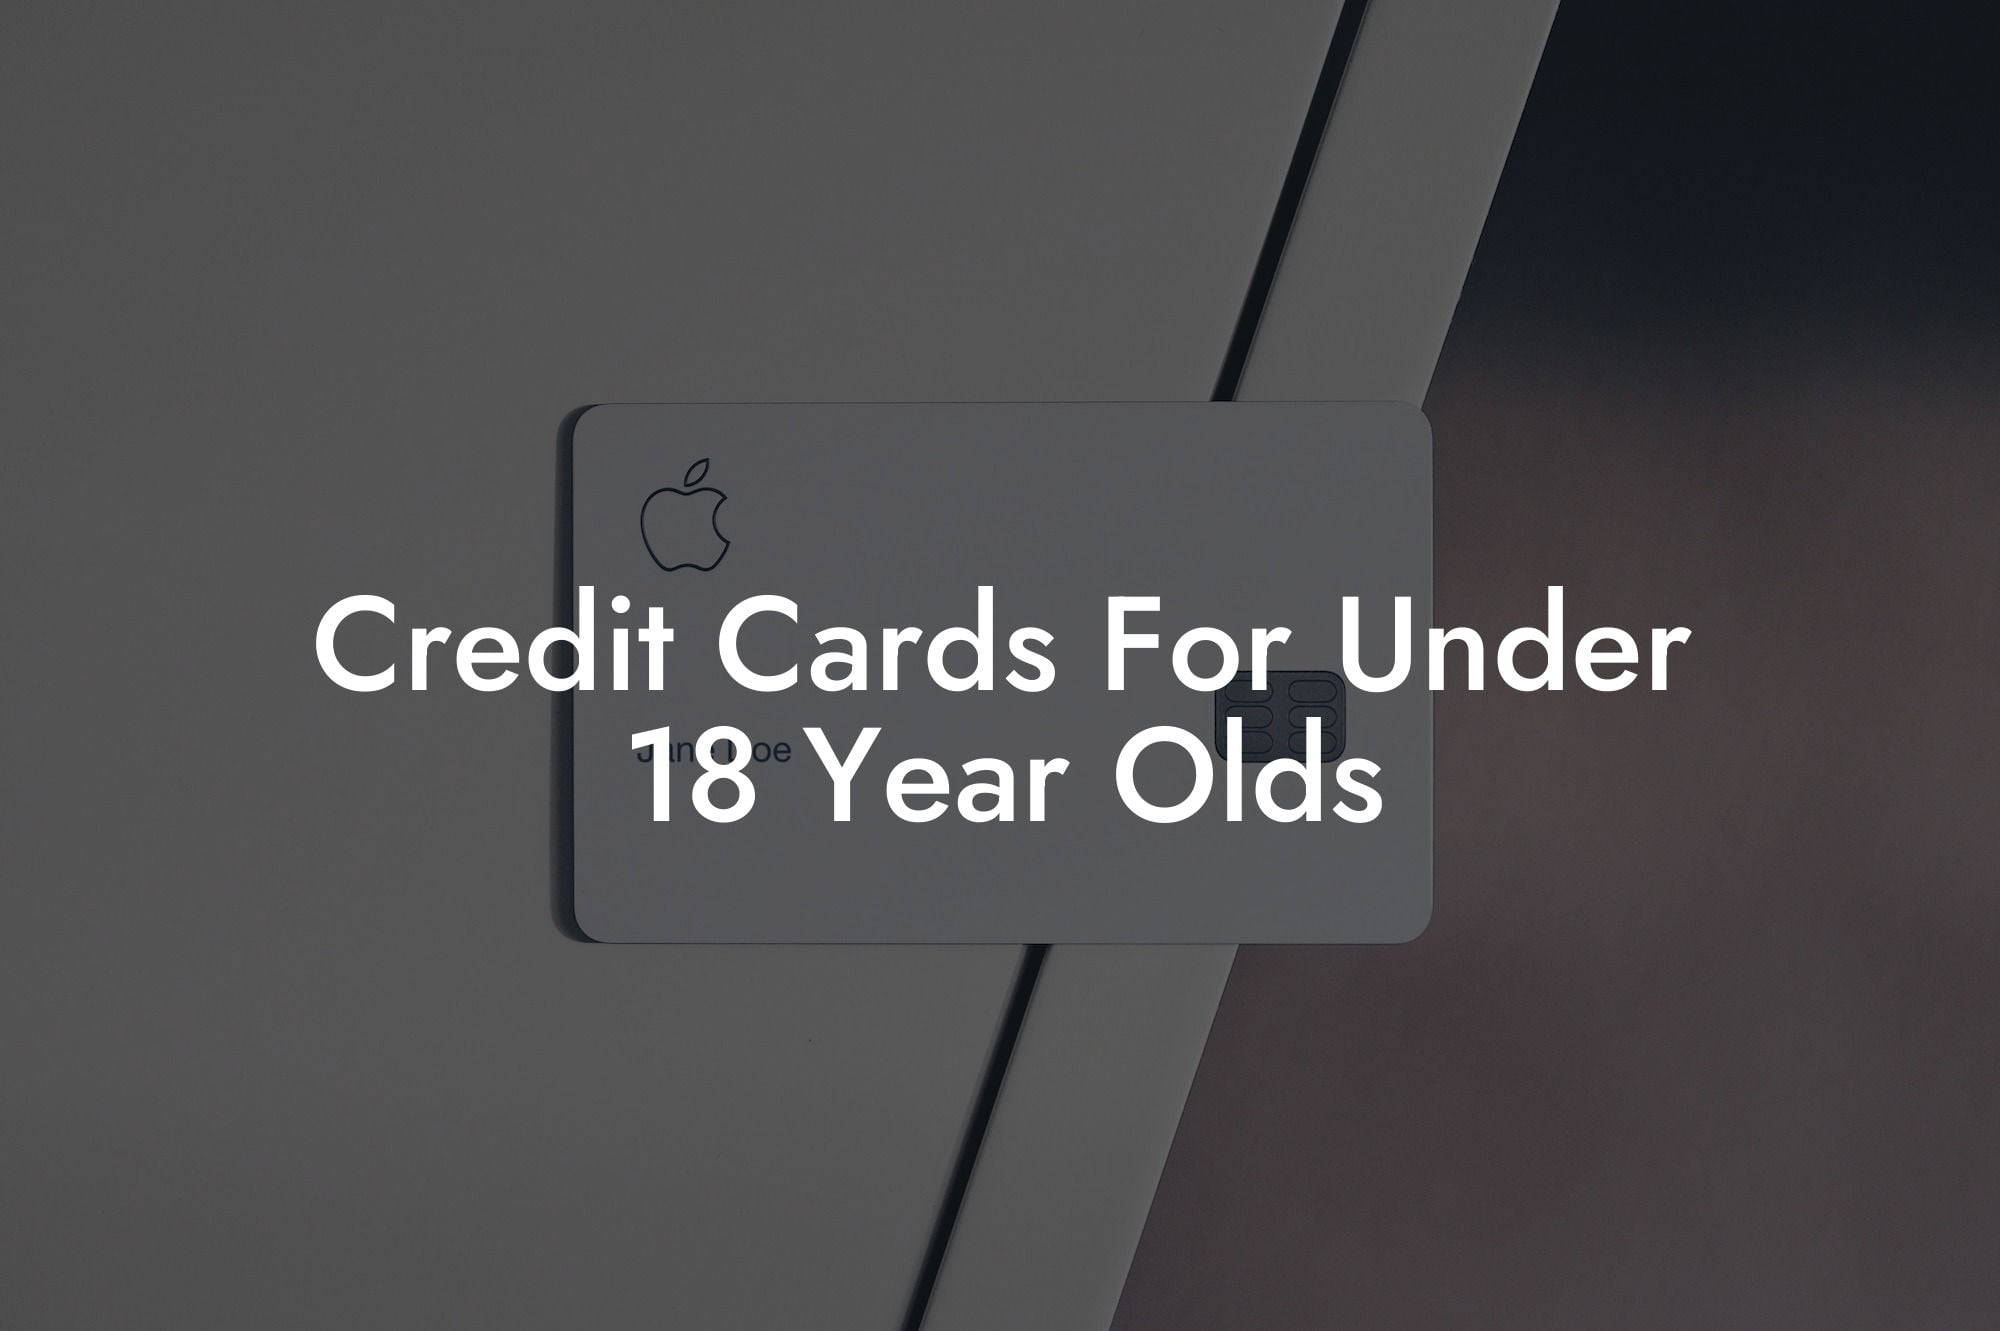 Credit Cards For Under 18 Year Olds